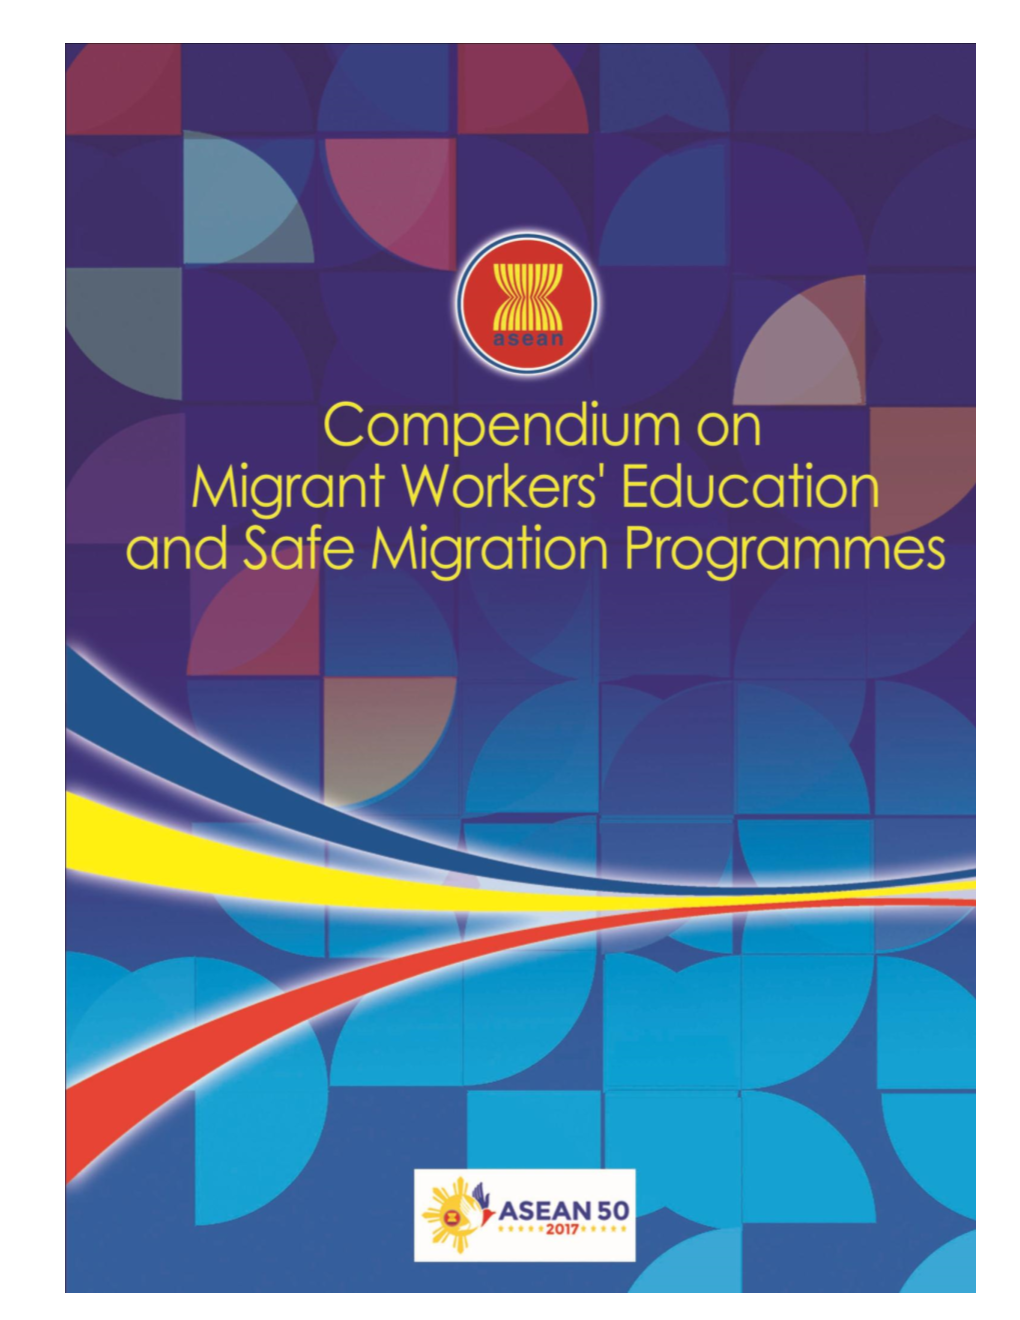 Compendium on Migrant Workers' Education and Safe